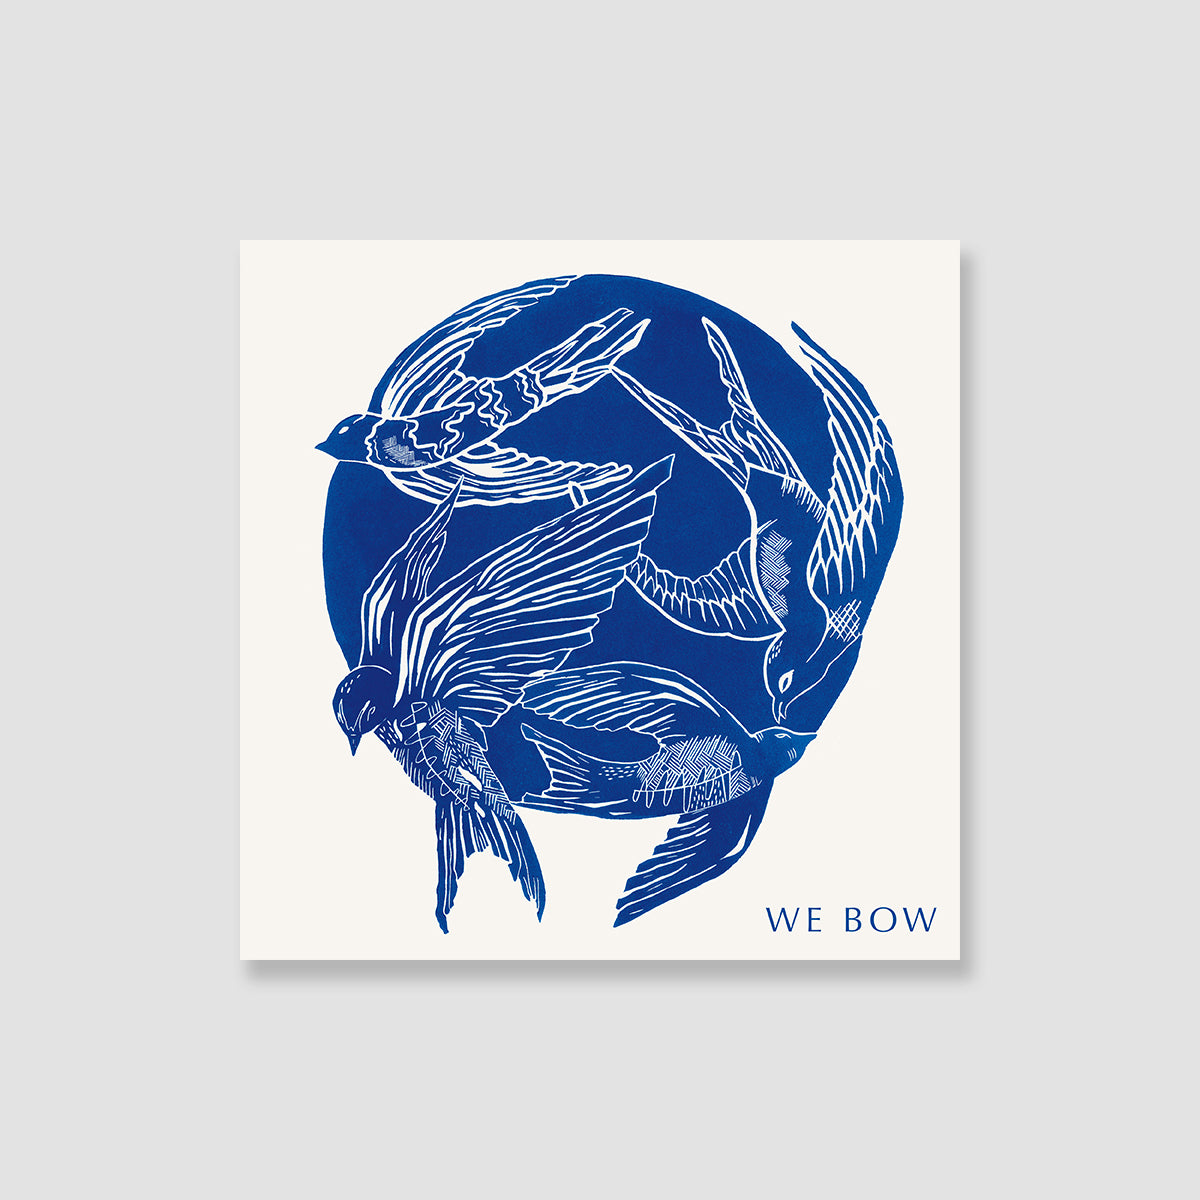 We Bow EP